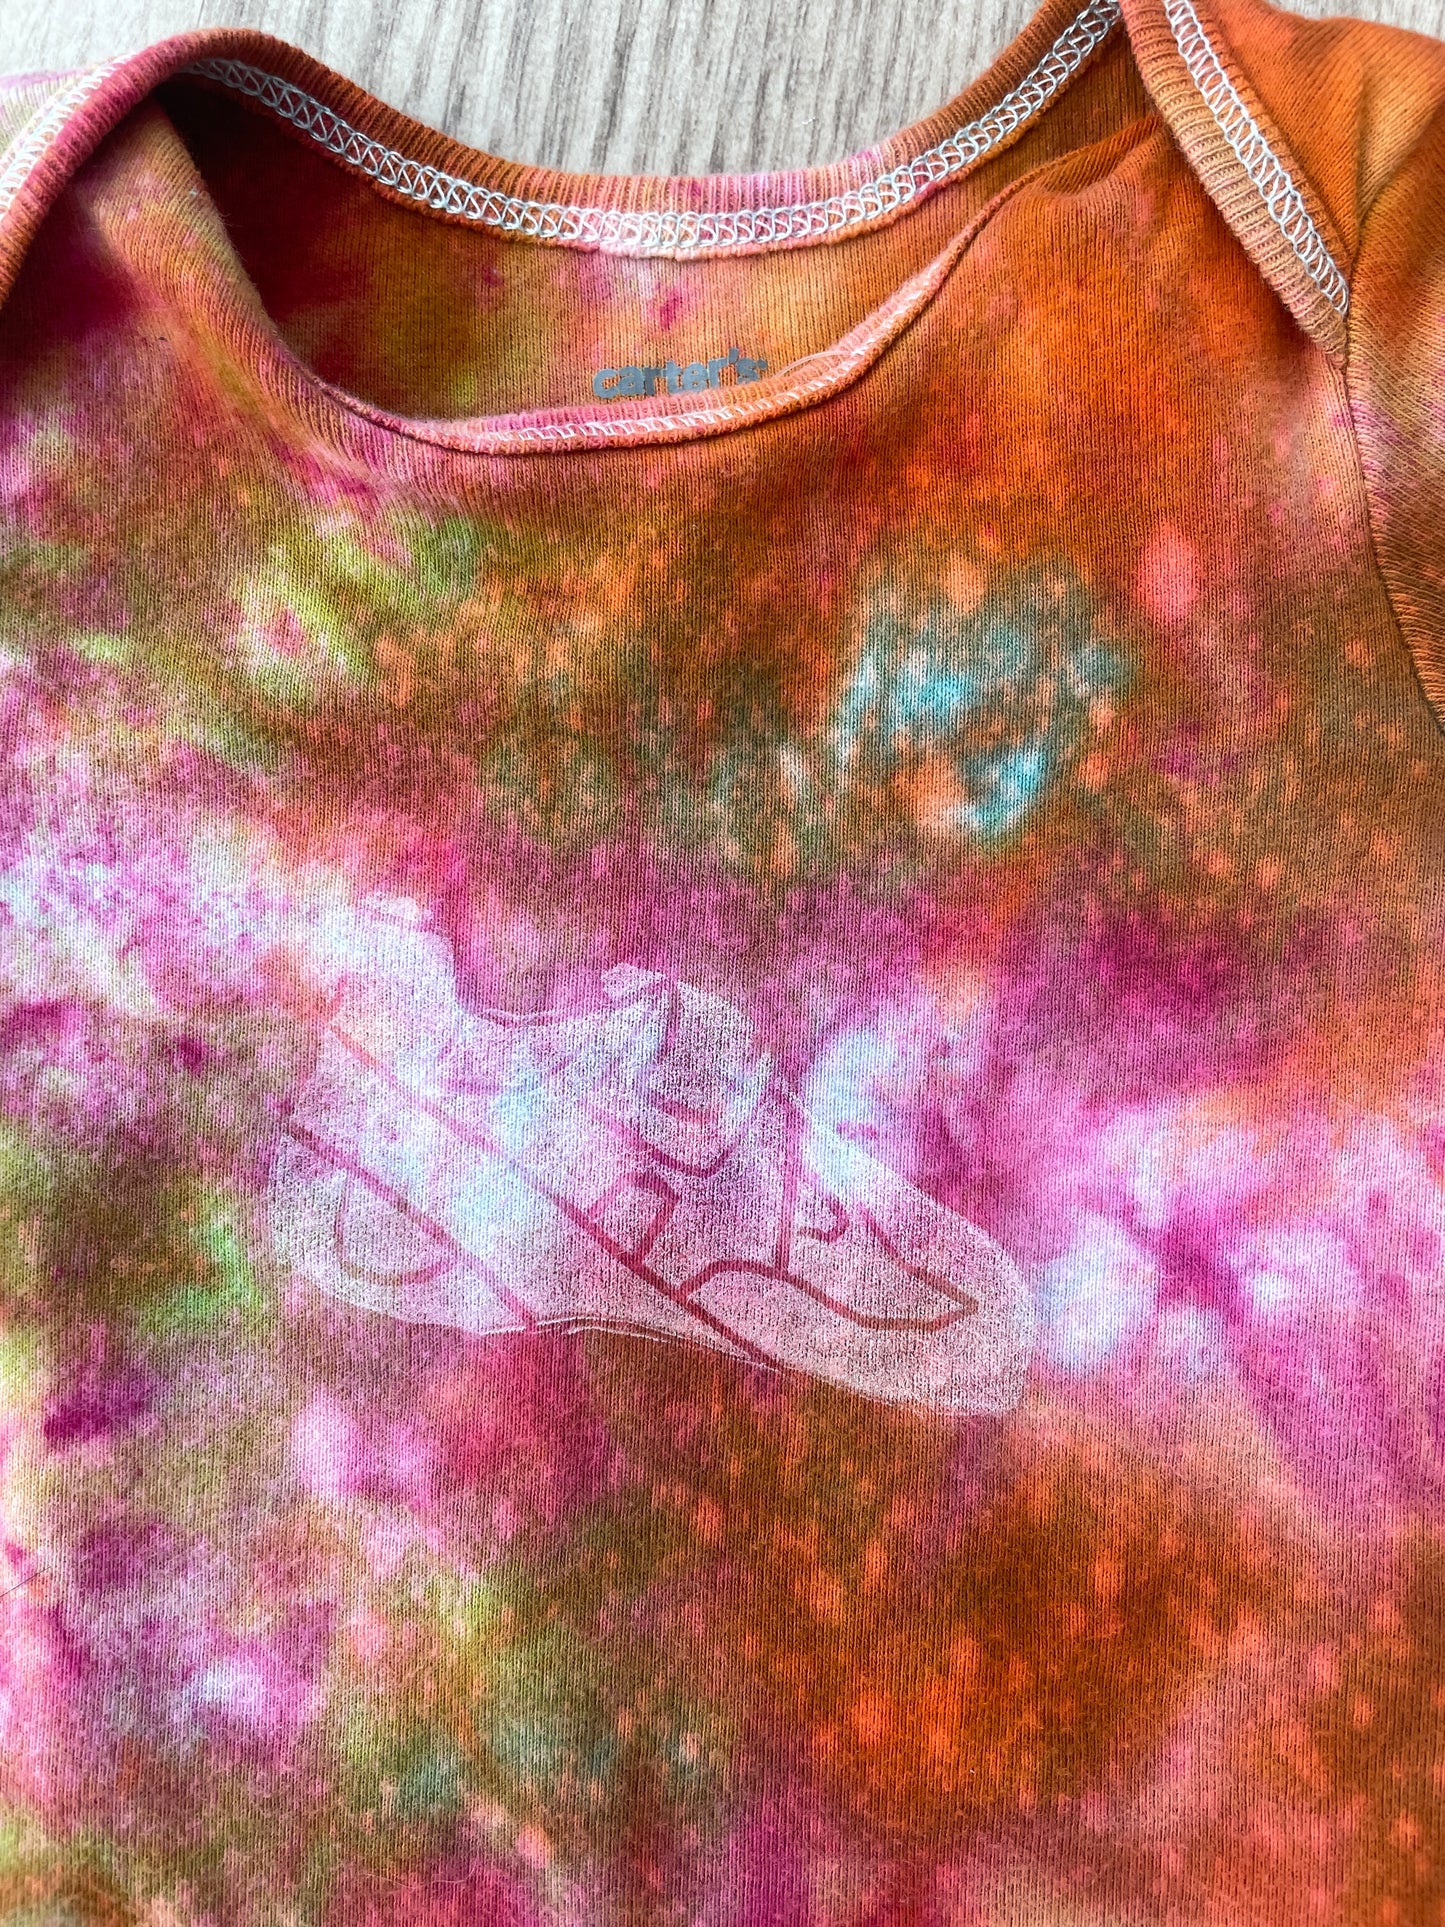 3 Months Climbing Shoe Short Sleeve Baby Onesie | Handmade, Upcycled Tie Dye Cotton Onesie | Galaxy Ice Dyed Pink and Orange Baby Clothing